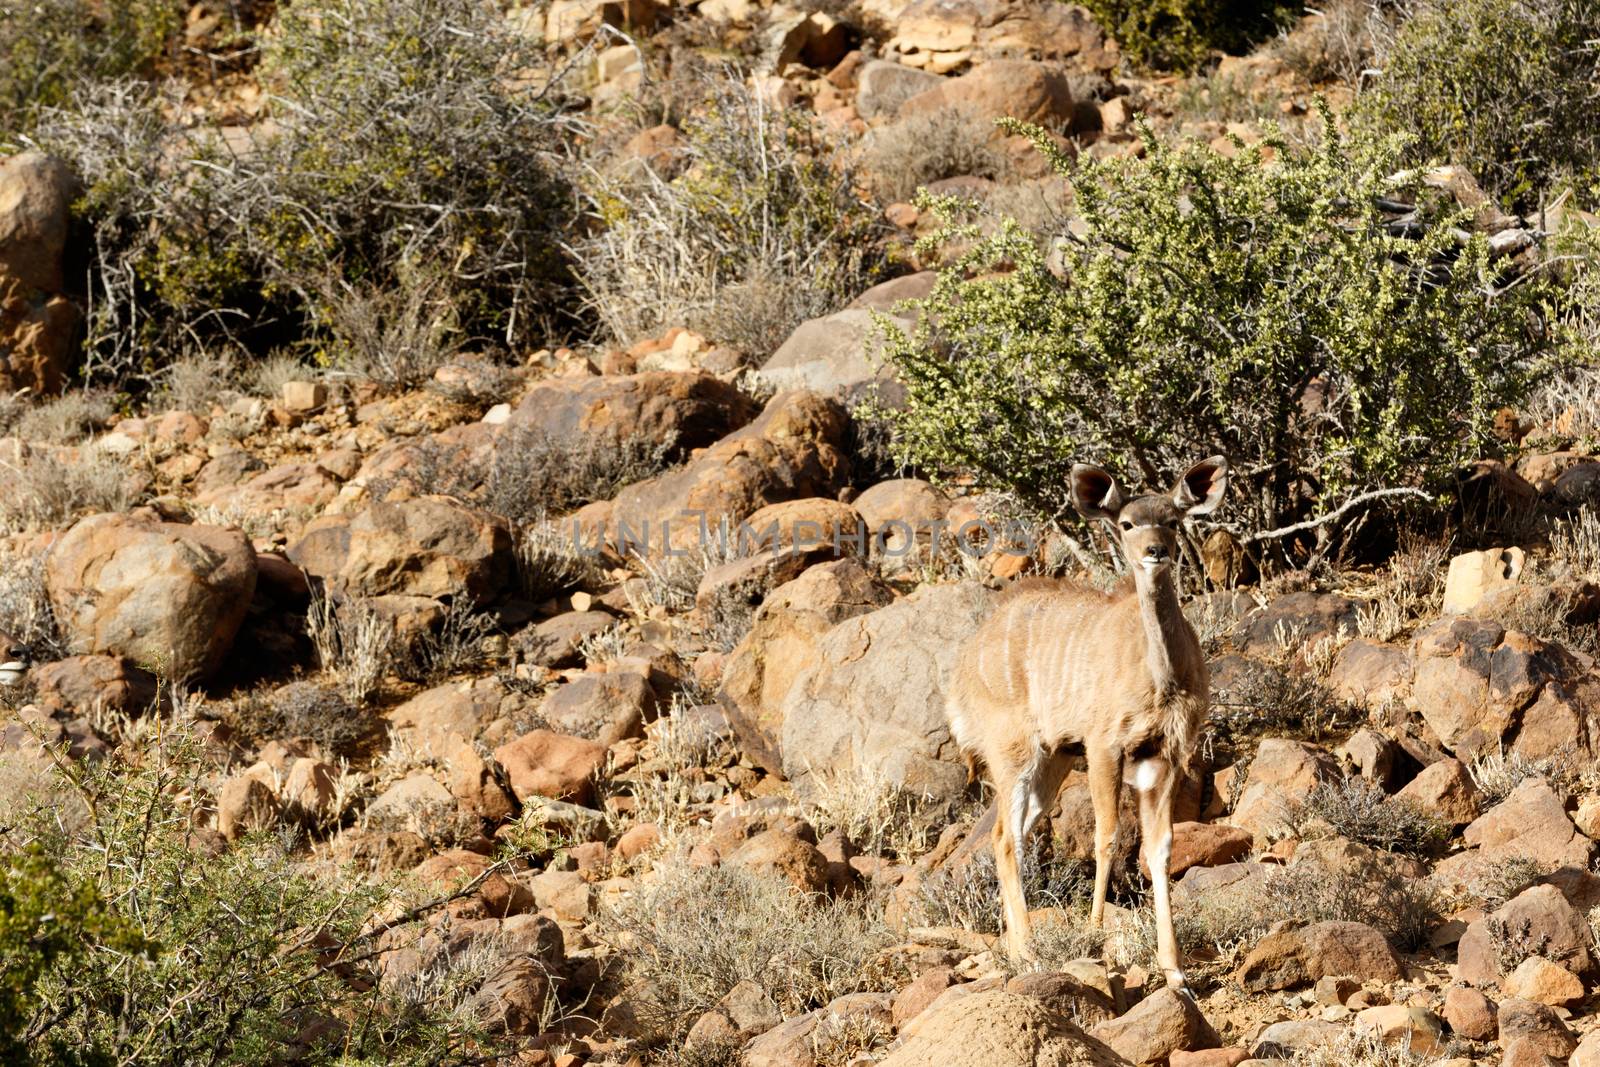 Female Kudu looking - The Karoo National Park, founded in 1979, is a wildlife reserve in the Great Karoo area of the Western Cape, South Africa near Beaufort West.